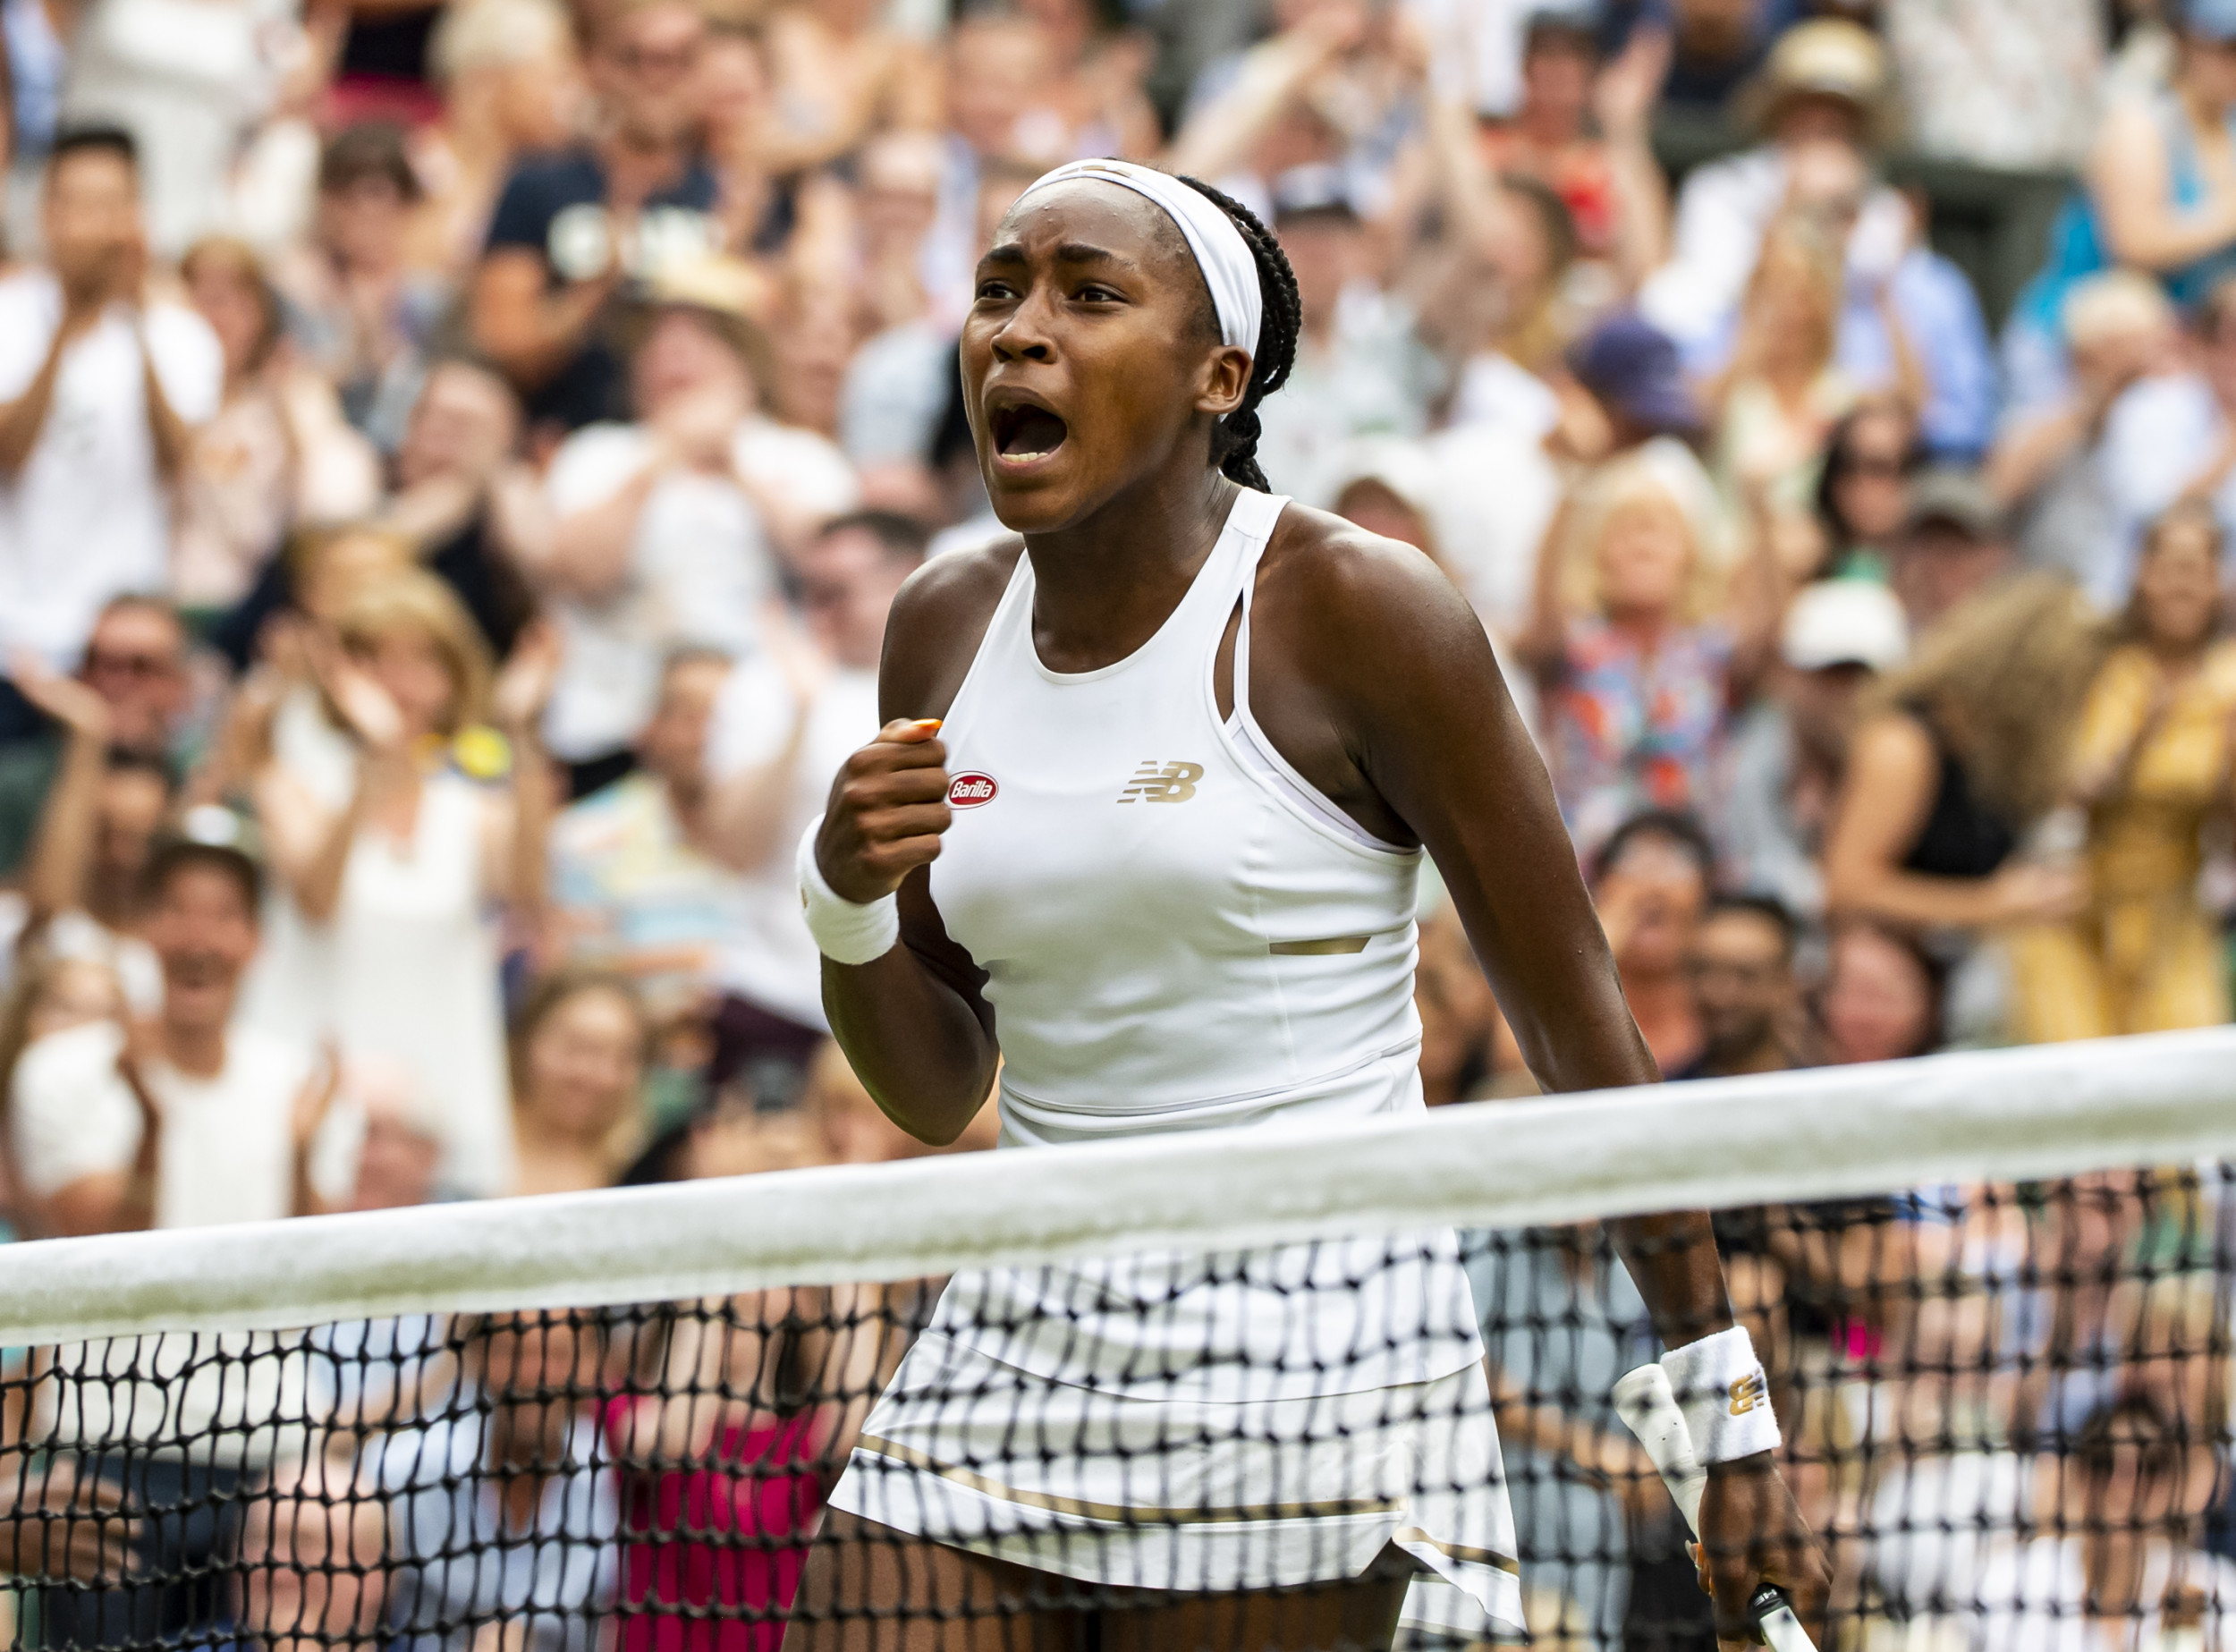 Wimbledon 2019 How to Watch Coco Gauff, Serena Williams Round of 16 Matches, Start times, Live Stream